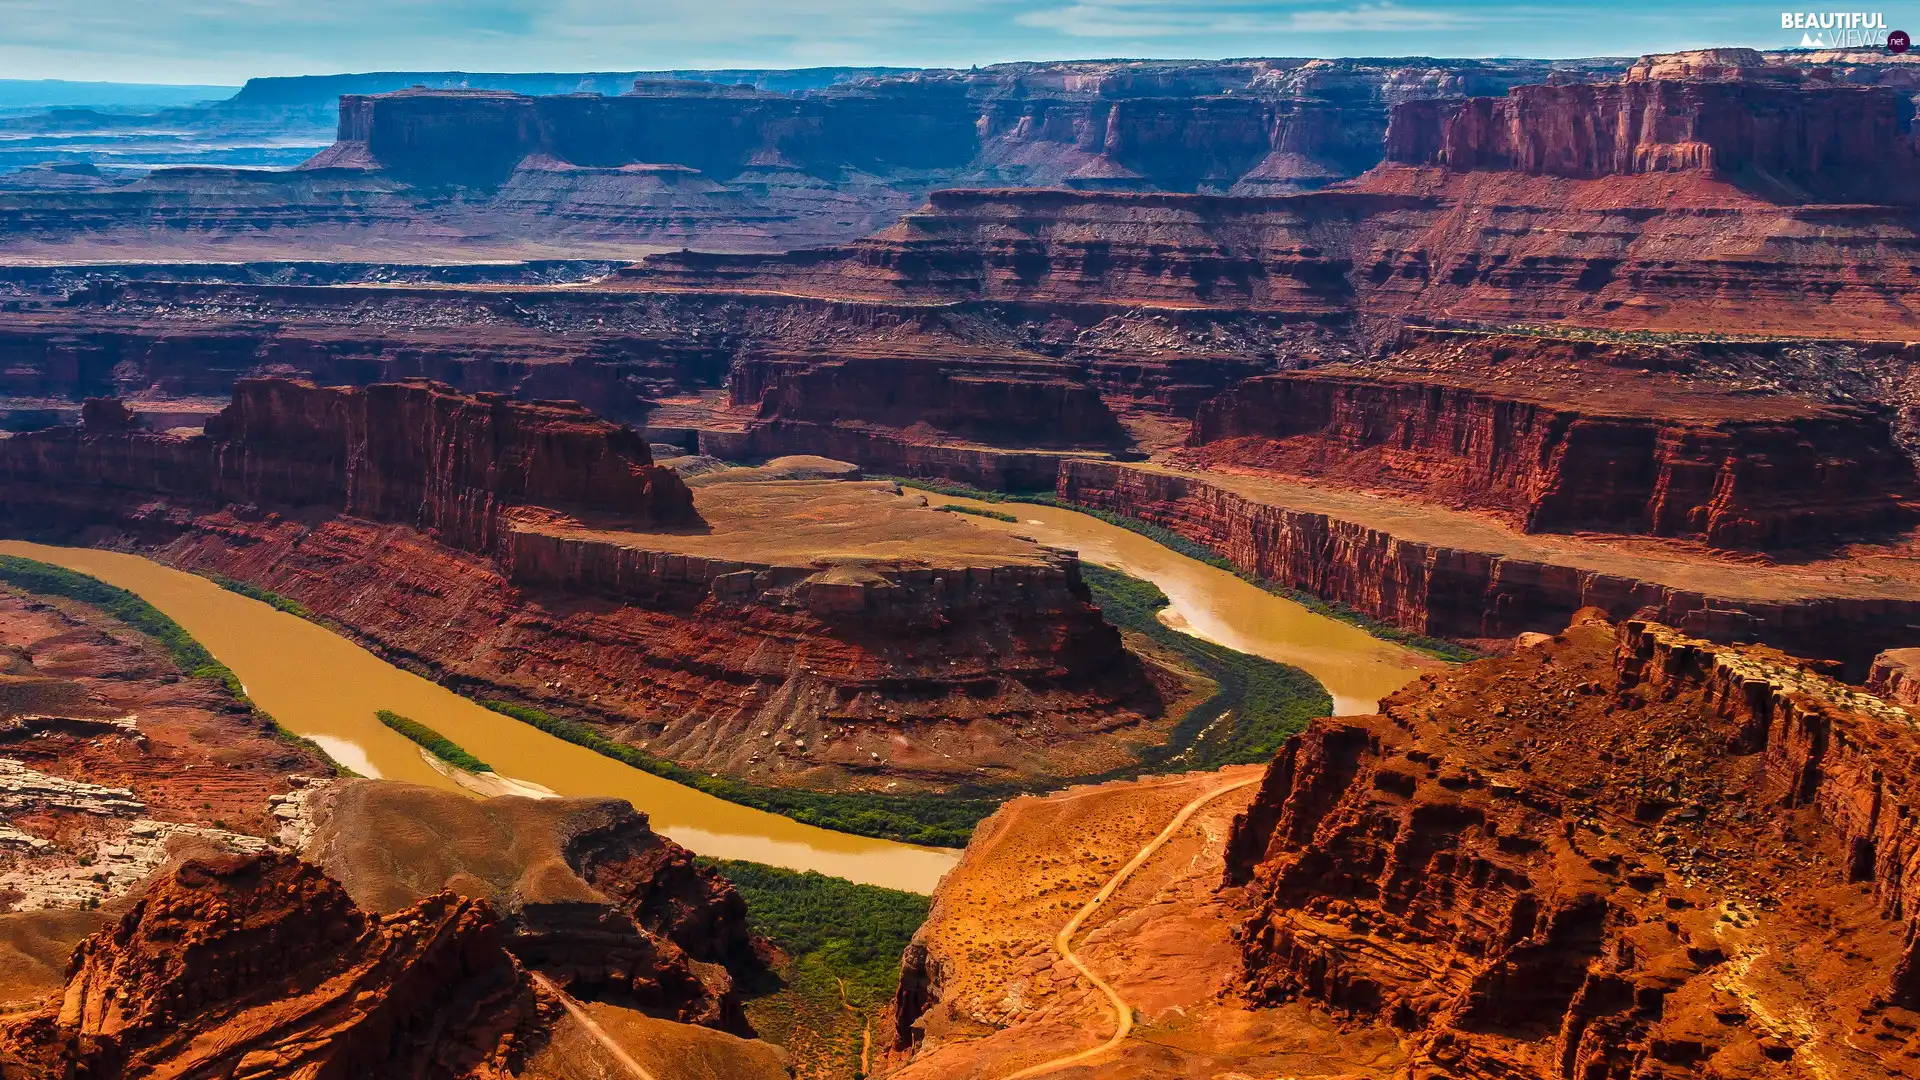 Utah State, The United States, rocks, State Park Dead Horse Point, The Colorado River